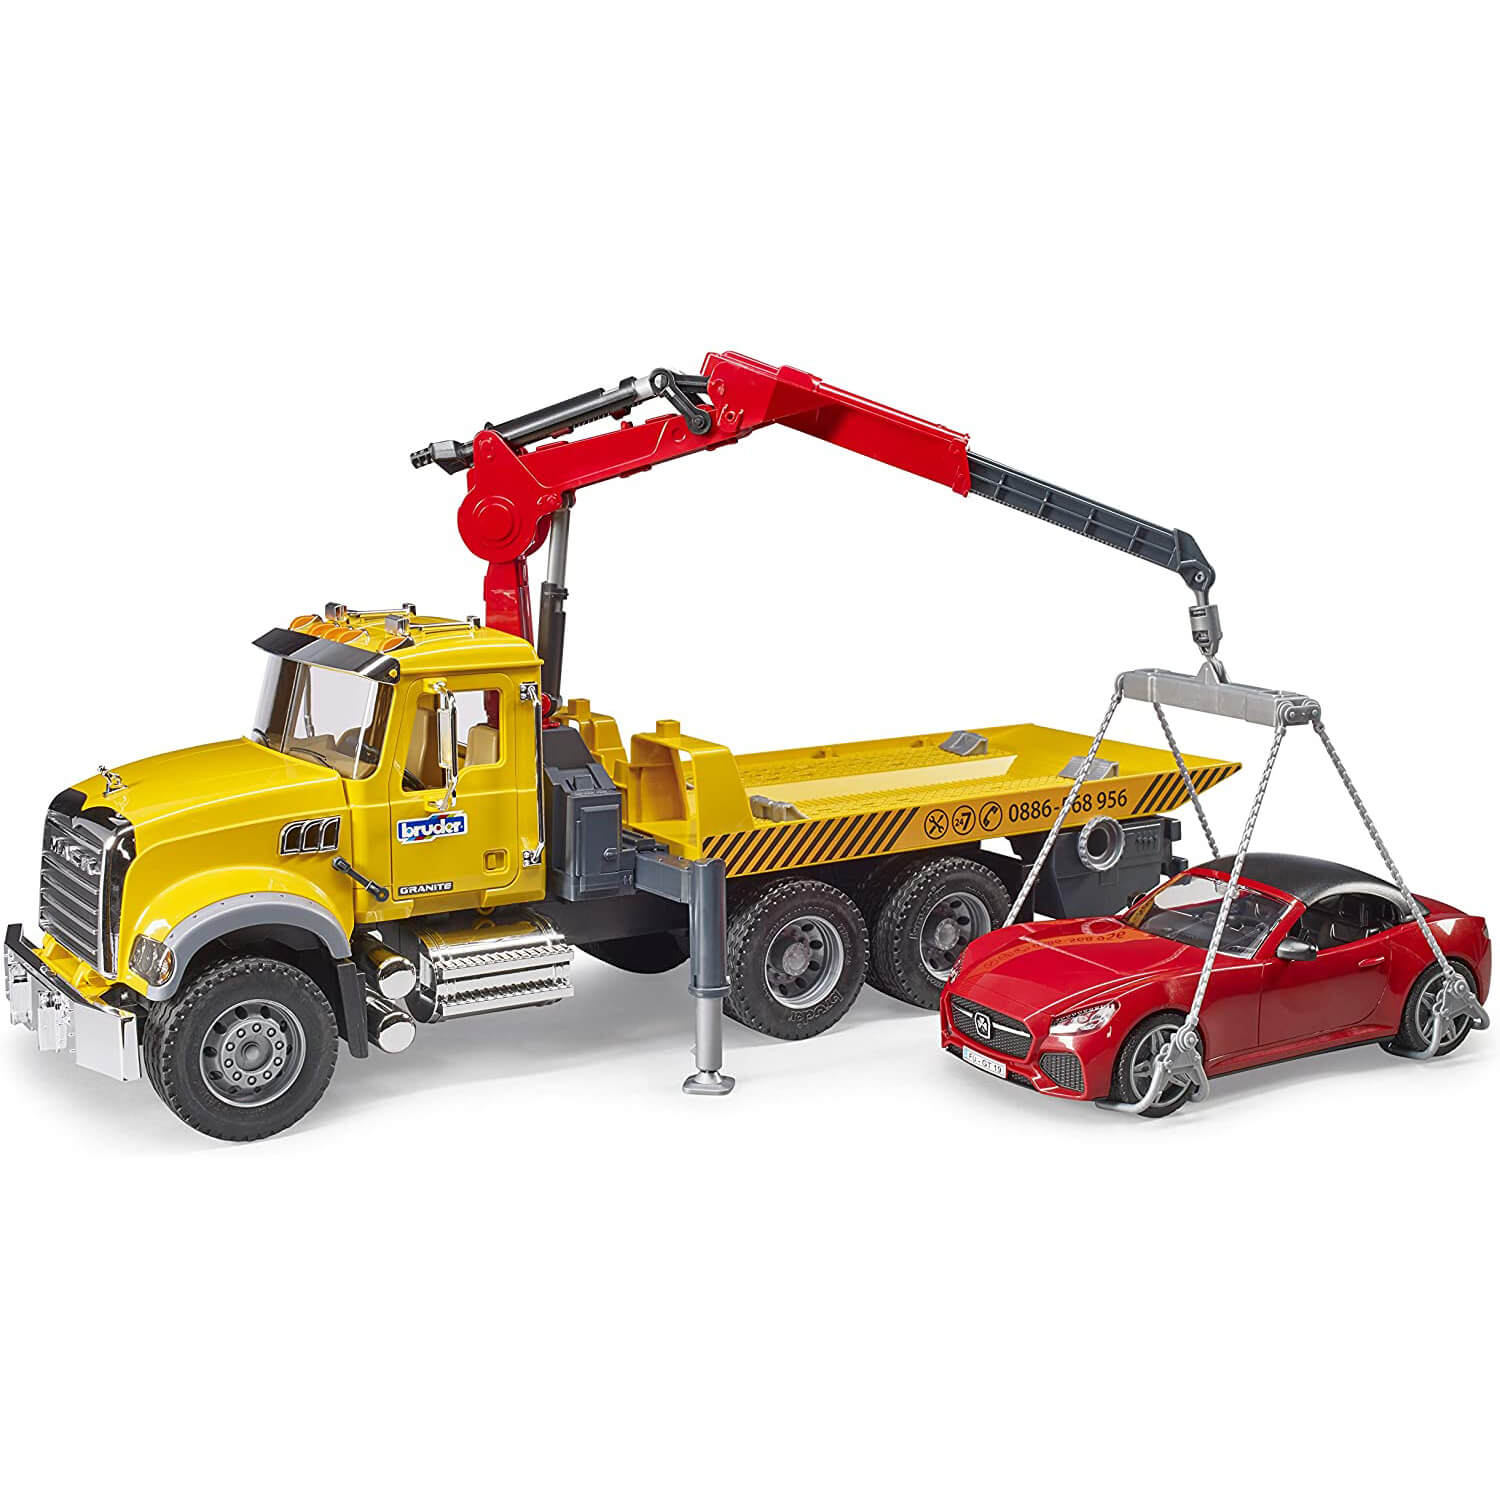 Bruder Pro Series MACK Granite Tow Truck with Bruder Roadster 1:16 Scale Vehicle